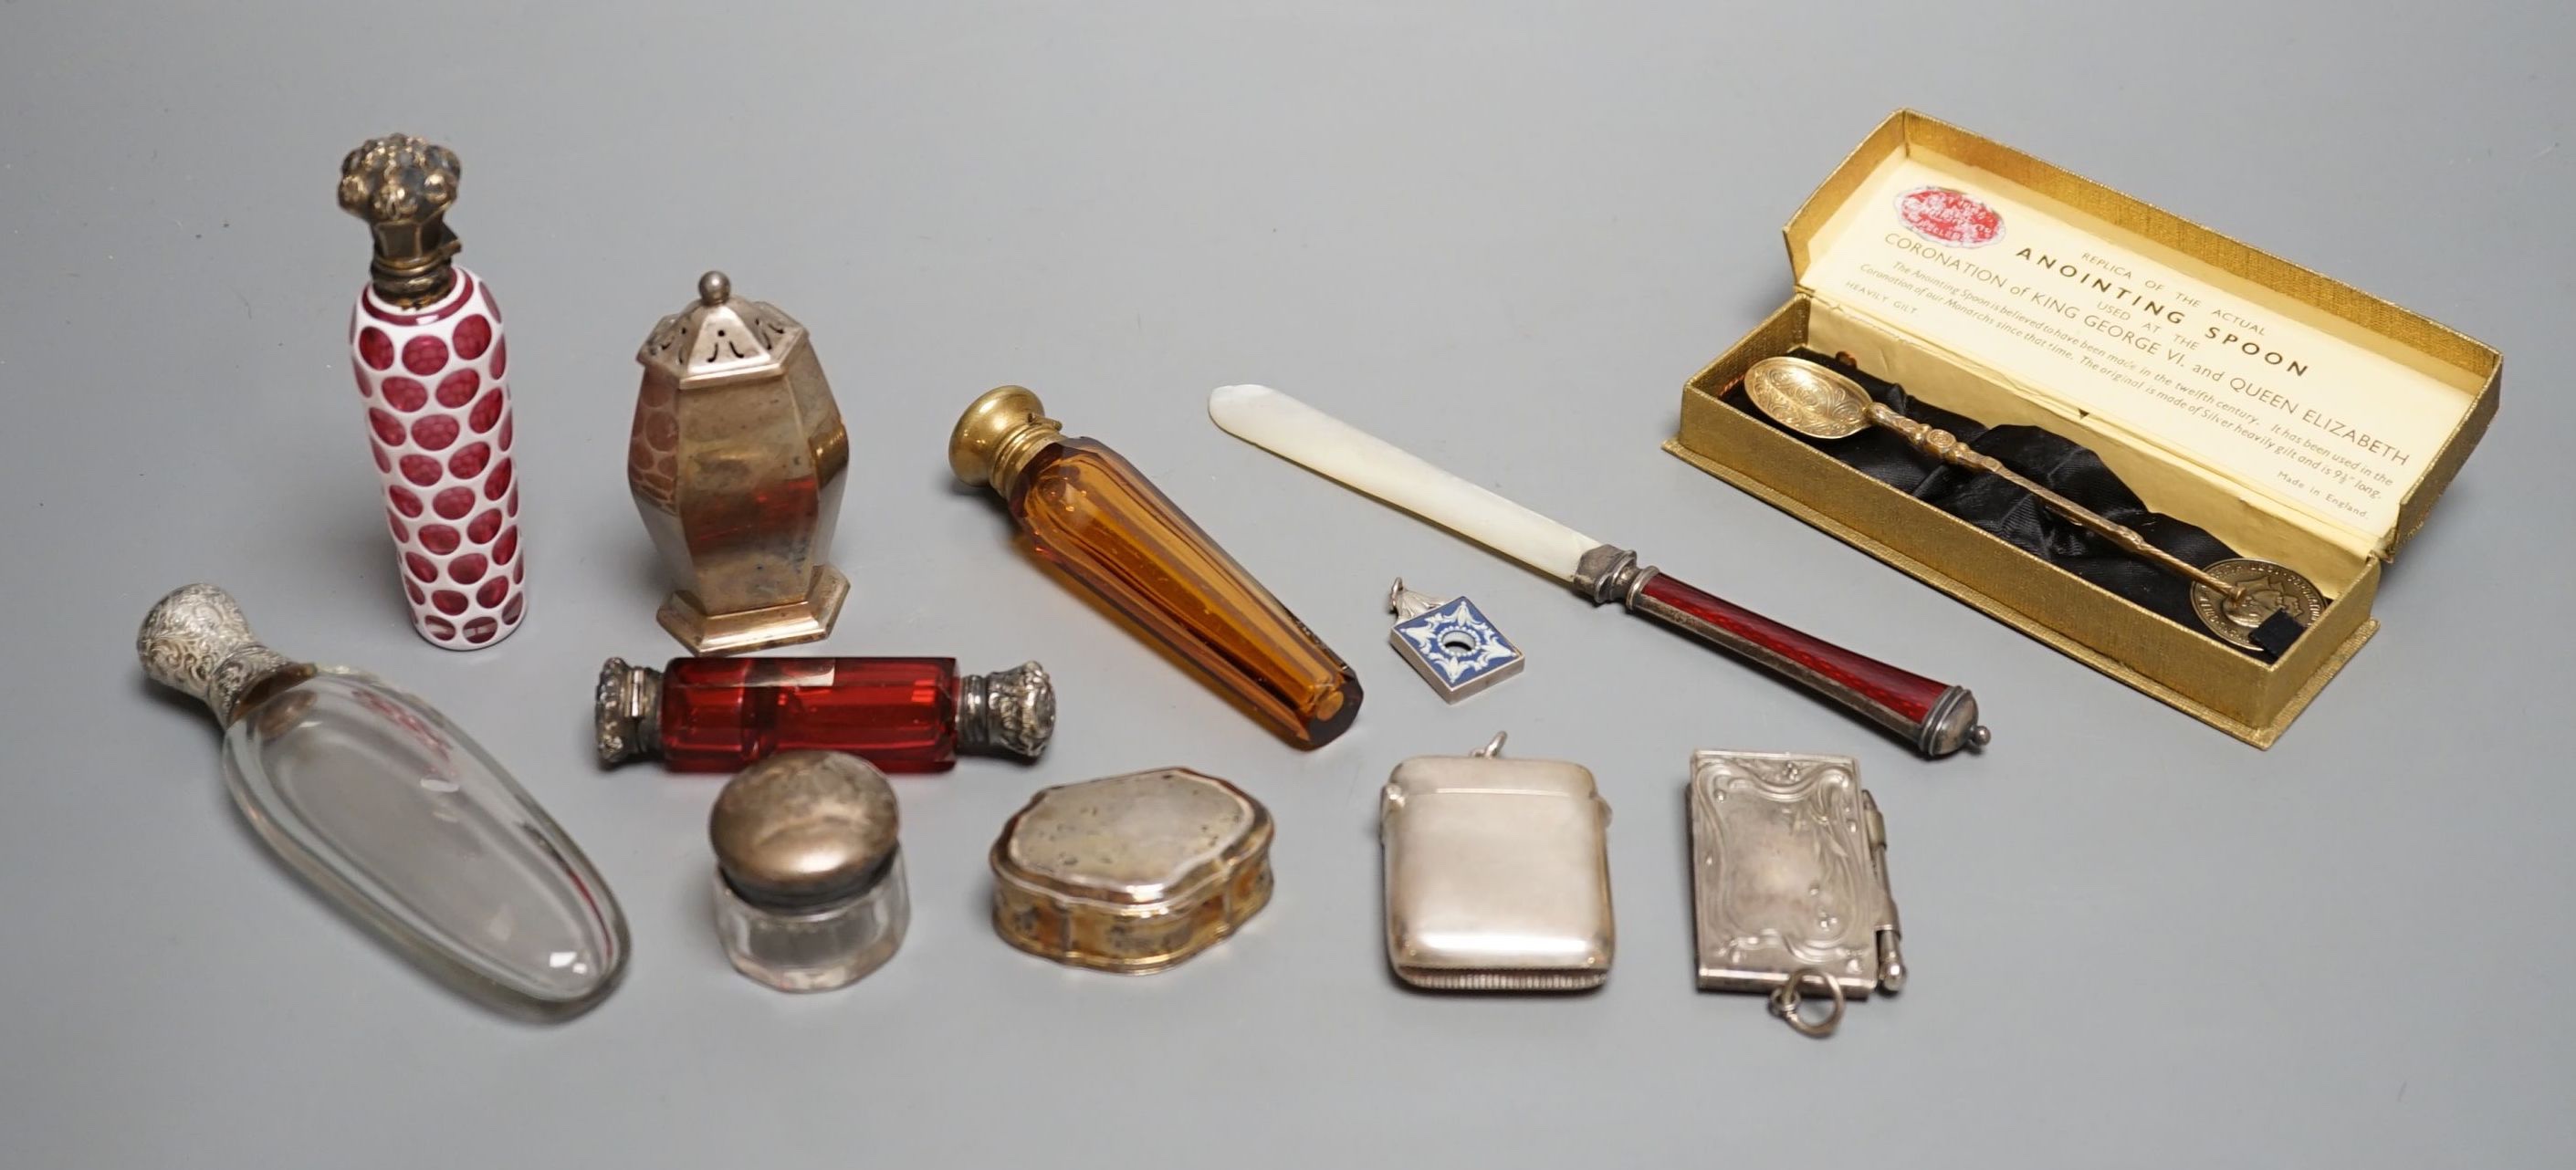 Four assorted white of gilt metal mounted glass scent bottles, largest 12.2cm, an unusual gilt white metal snuff box?, with spoon, a sterling and enamel mounted mother of pearl paper knife and other minor items.